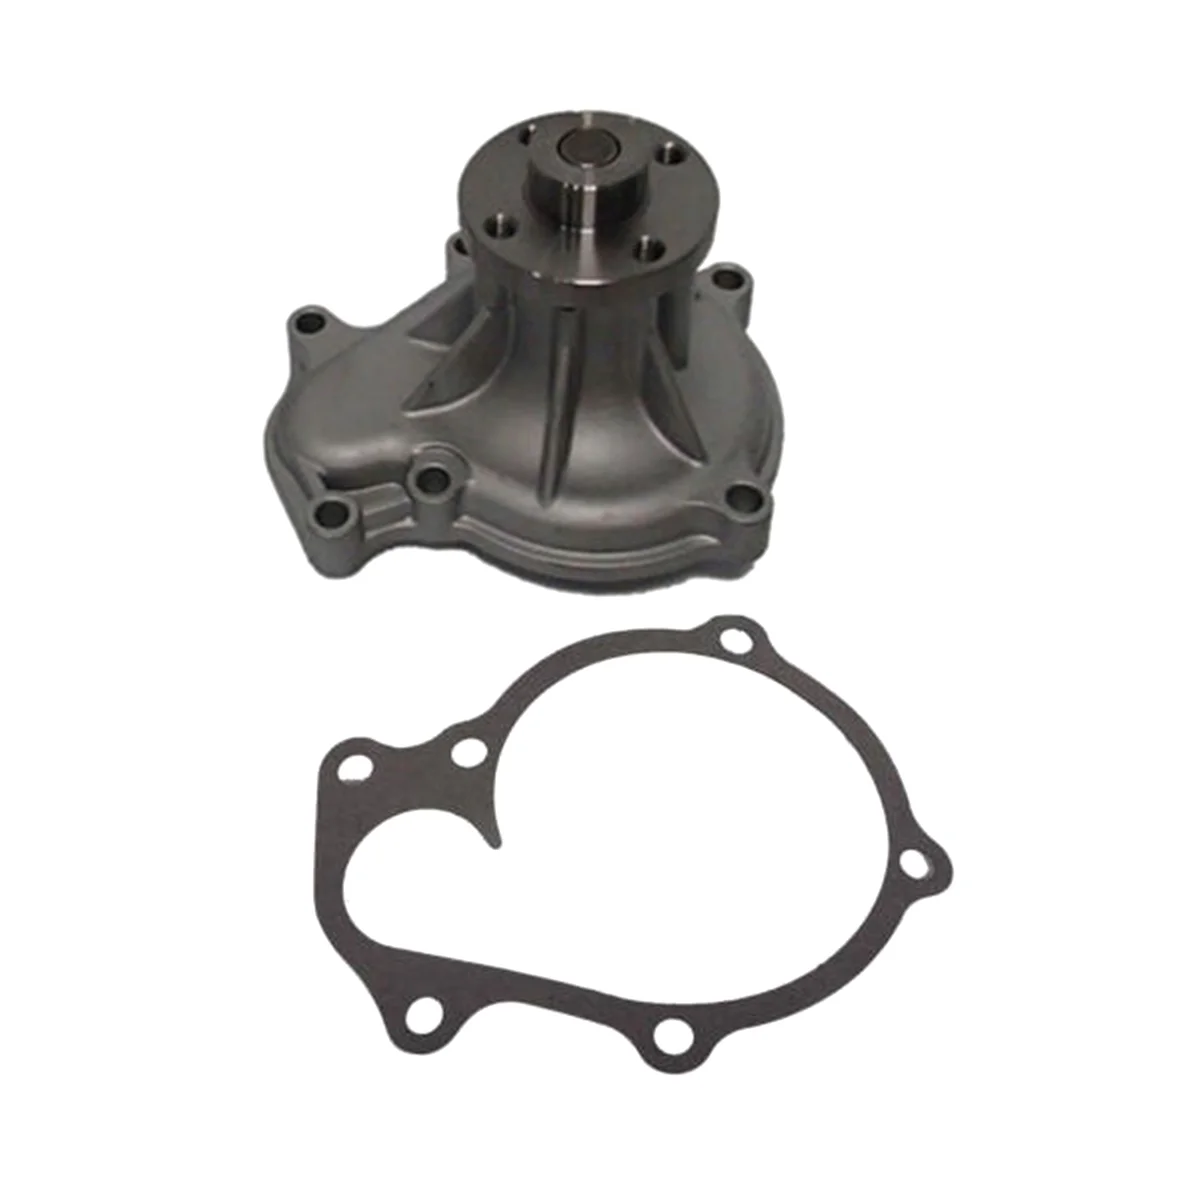 

Excavator Parts Water Pump with Gasket for Bobcat Loader A300 A770 S300 S770 T300 T770 6680852